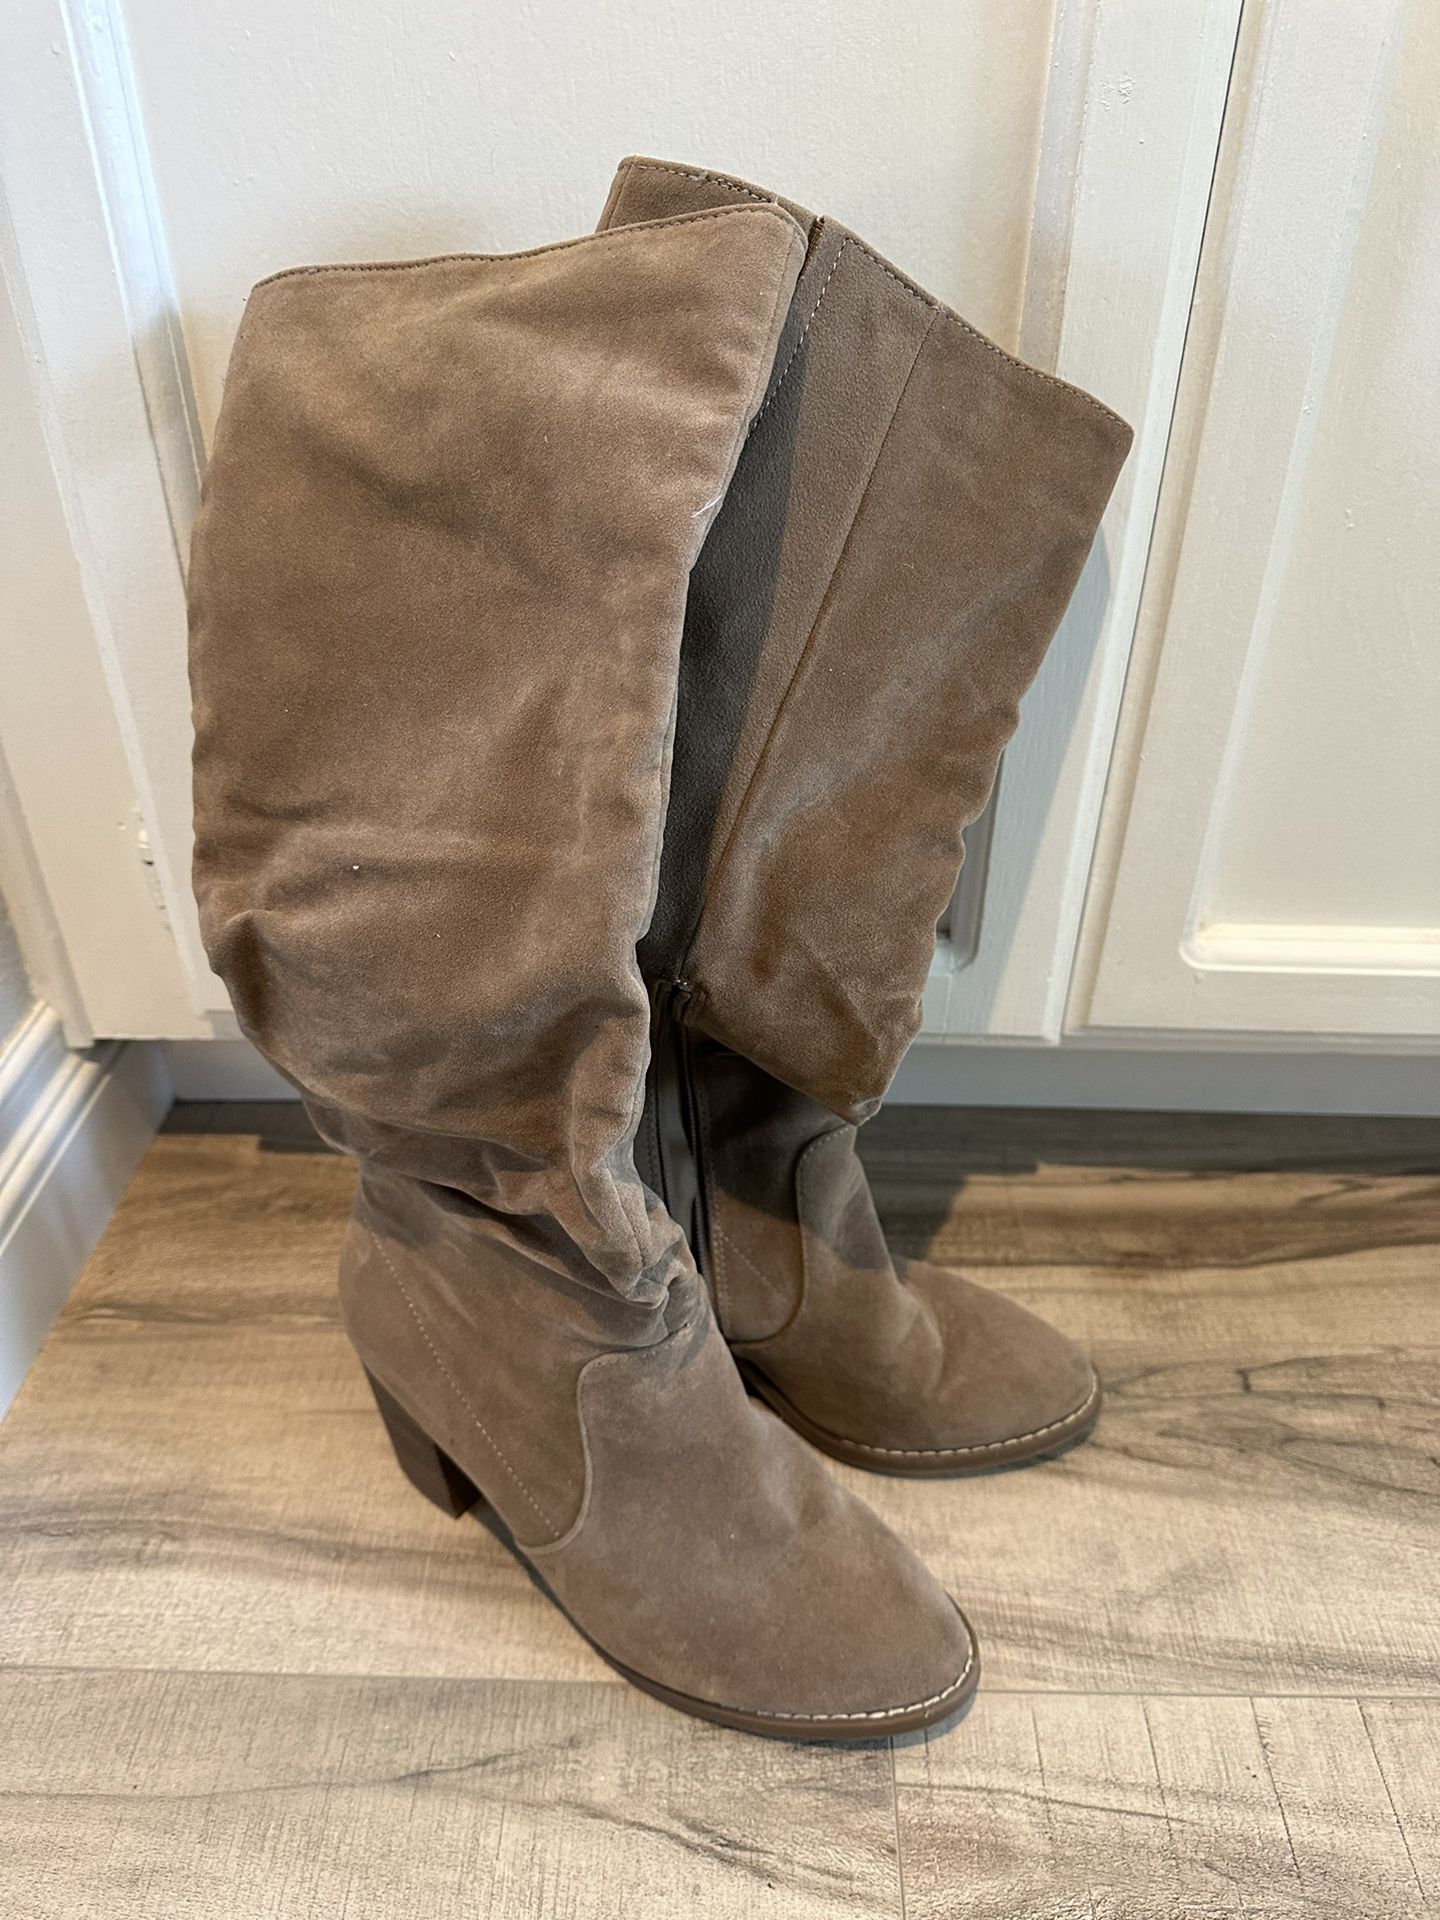 Women’s Size 9 Tall Boots